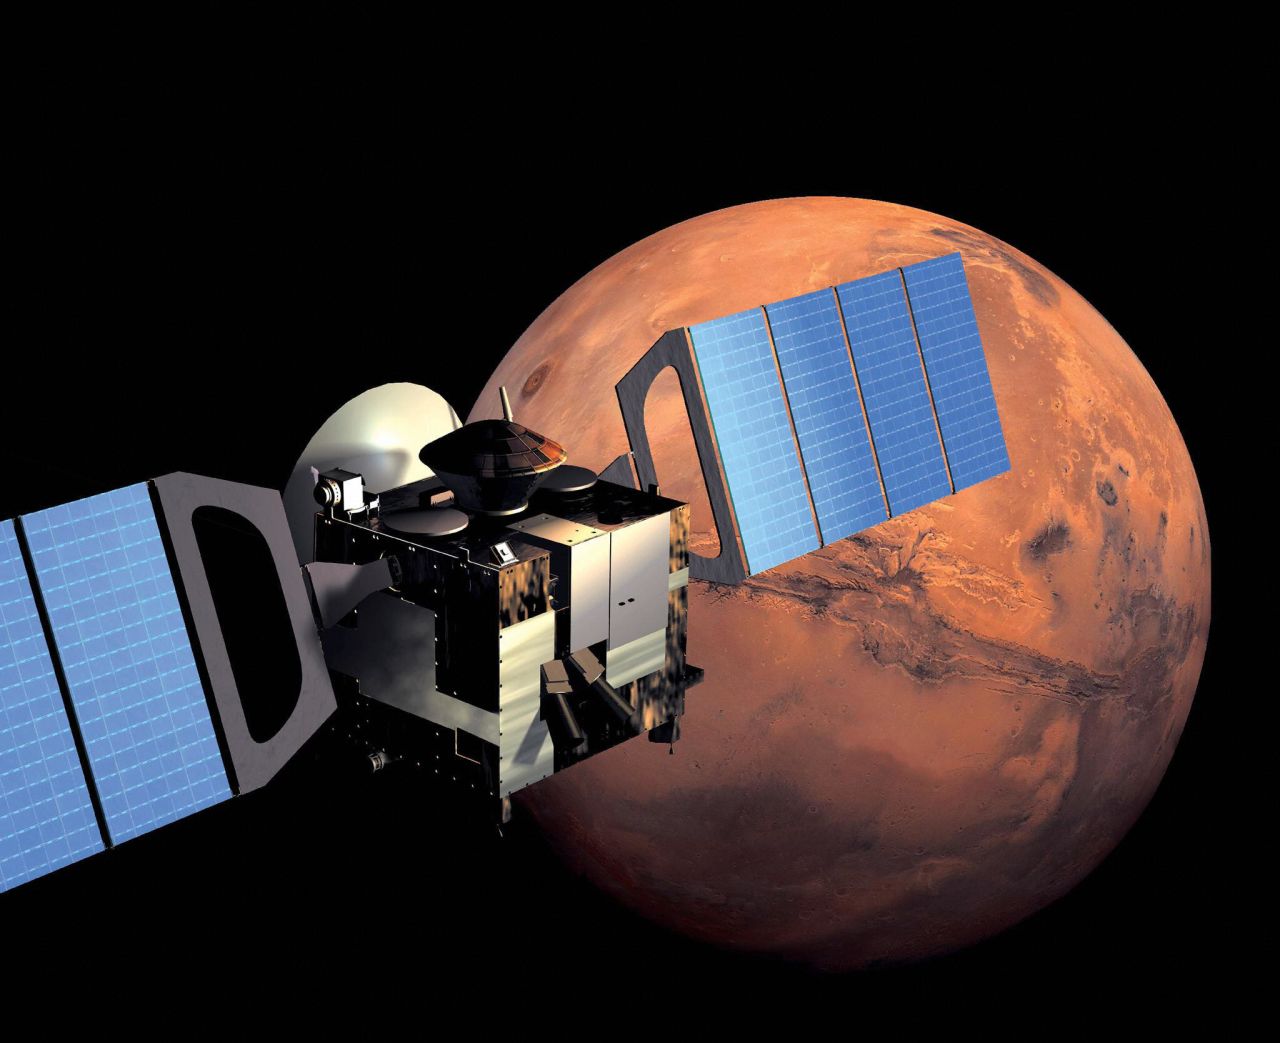 Even though a decade is nothing in the infinite realm of time, did we really think back in 2005 that 100 men and women would be chosen to live on Mars in the year 2025? The <a href="http://www.mars-one.com/" target="_blank" target="_blank">Mars One mission</a> has been described as "suicidal" but that hasn't deterred the candidates, who are desperate to settle on the red planet.